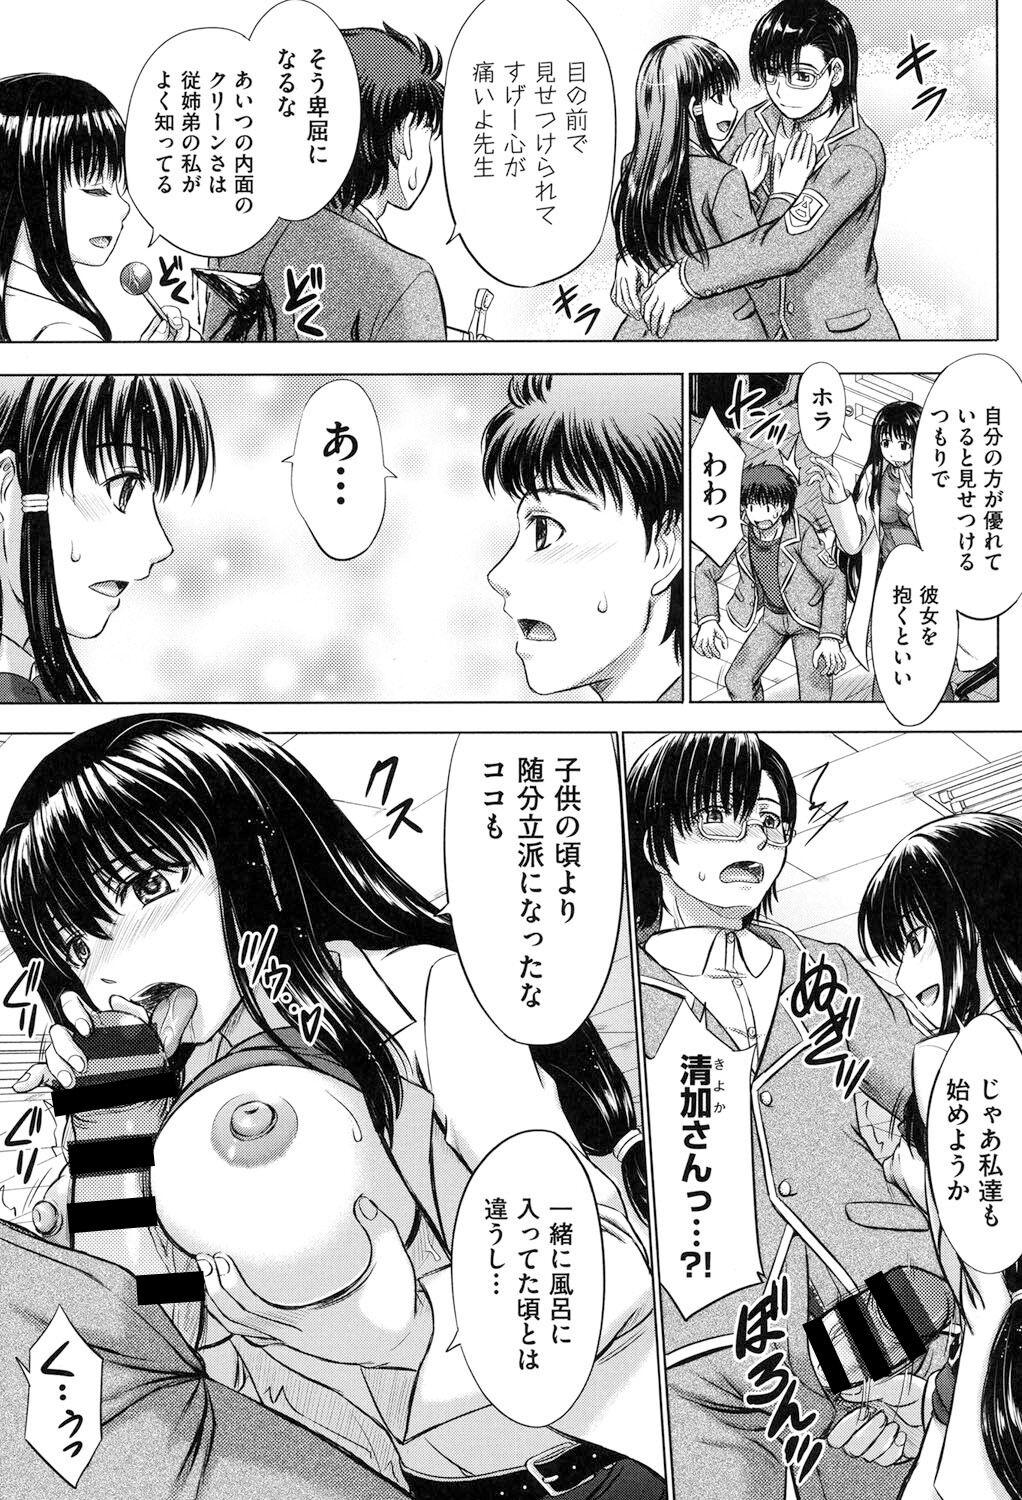 Houkago Kouhai Note - After School Mating Notes 37